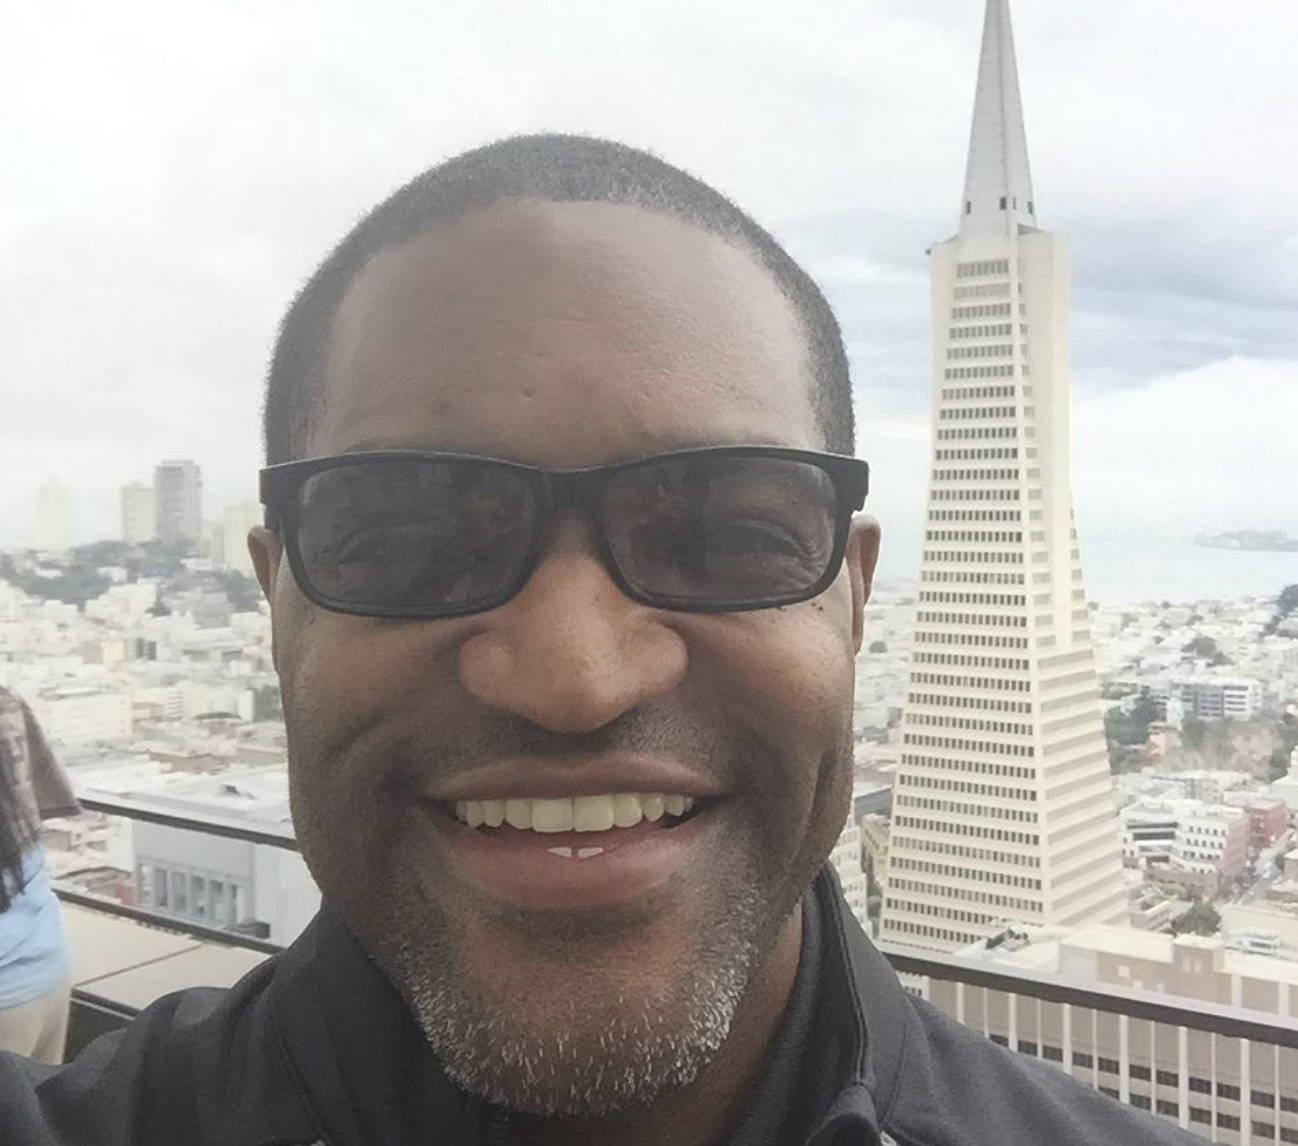 <p>On Jan. 27, news outlets reported that NBA reporter and analyst Sekou Smith, who covered the league for decades, had died from COVID-19 at 48. "We are all heartbroken over Sekou's tragic passing," read a statement from Turner Sports, which operates NBA TV and NBA.com -- where Sekou worked for the last decade-plus. "His commitment to journalism and the basketball community was immense and we will miss his warm, engaging personality."</p>